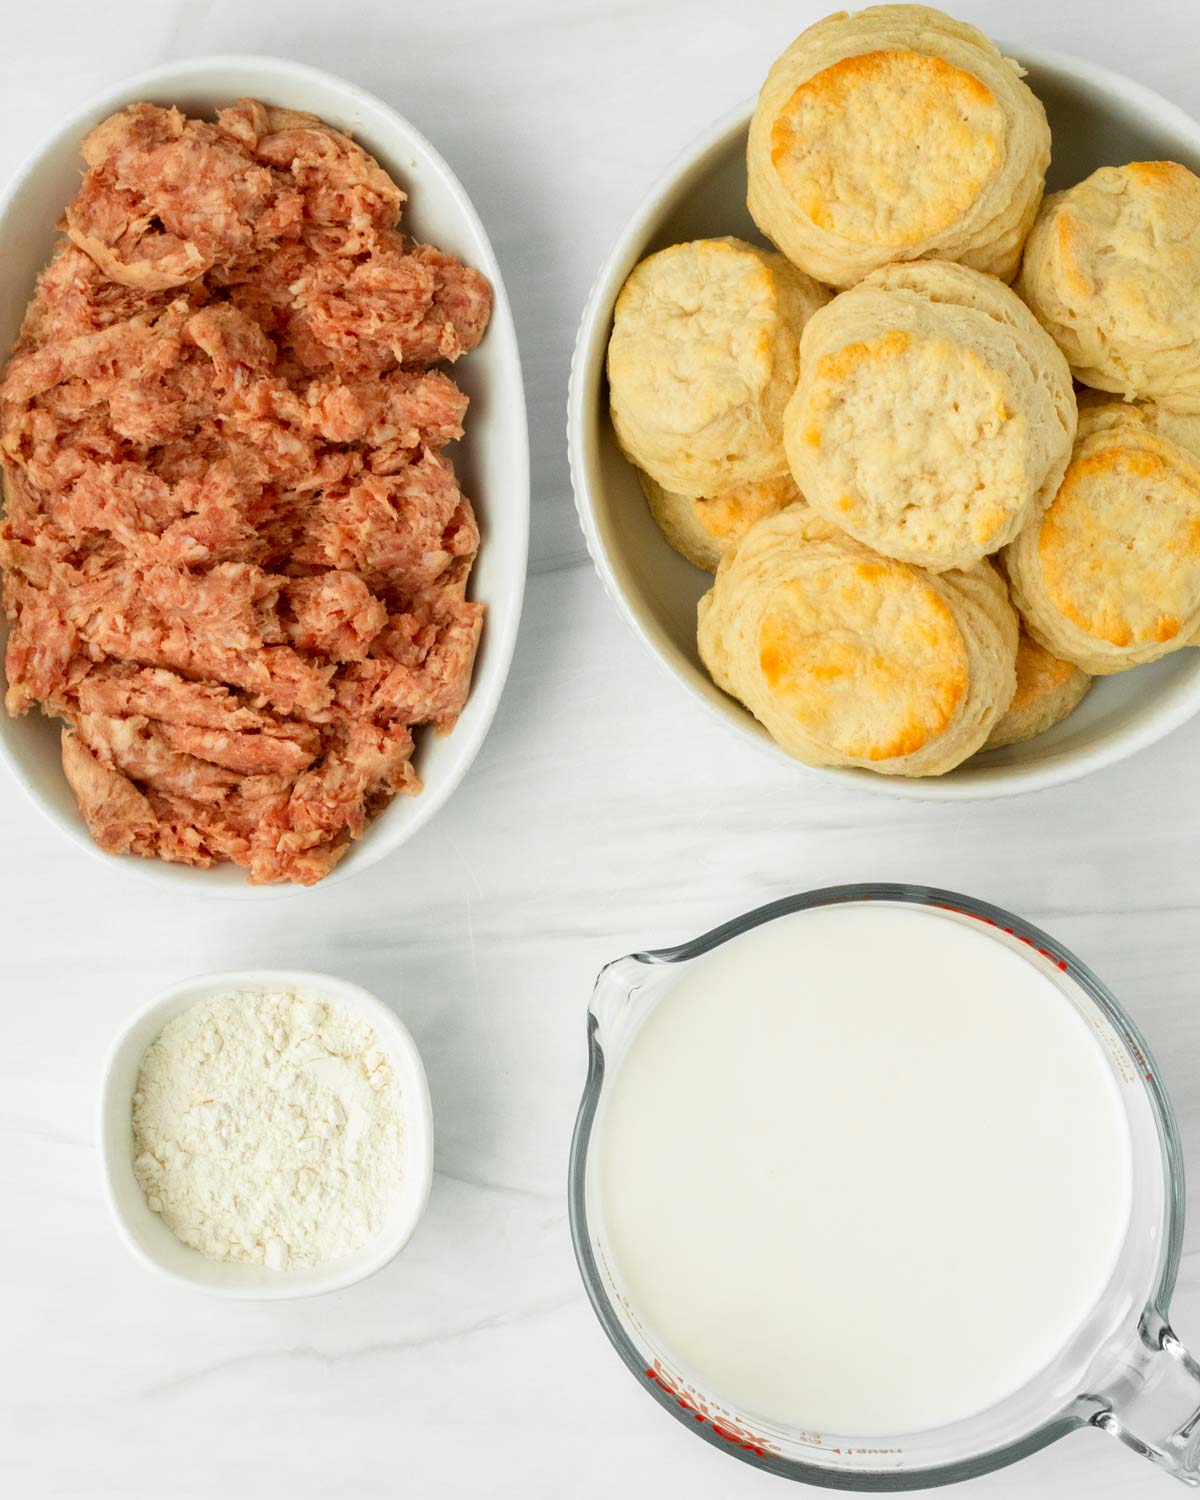 Biscuits and Gravy Ingredients